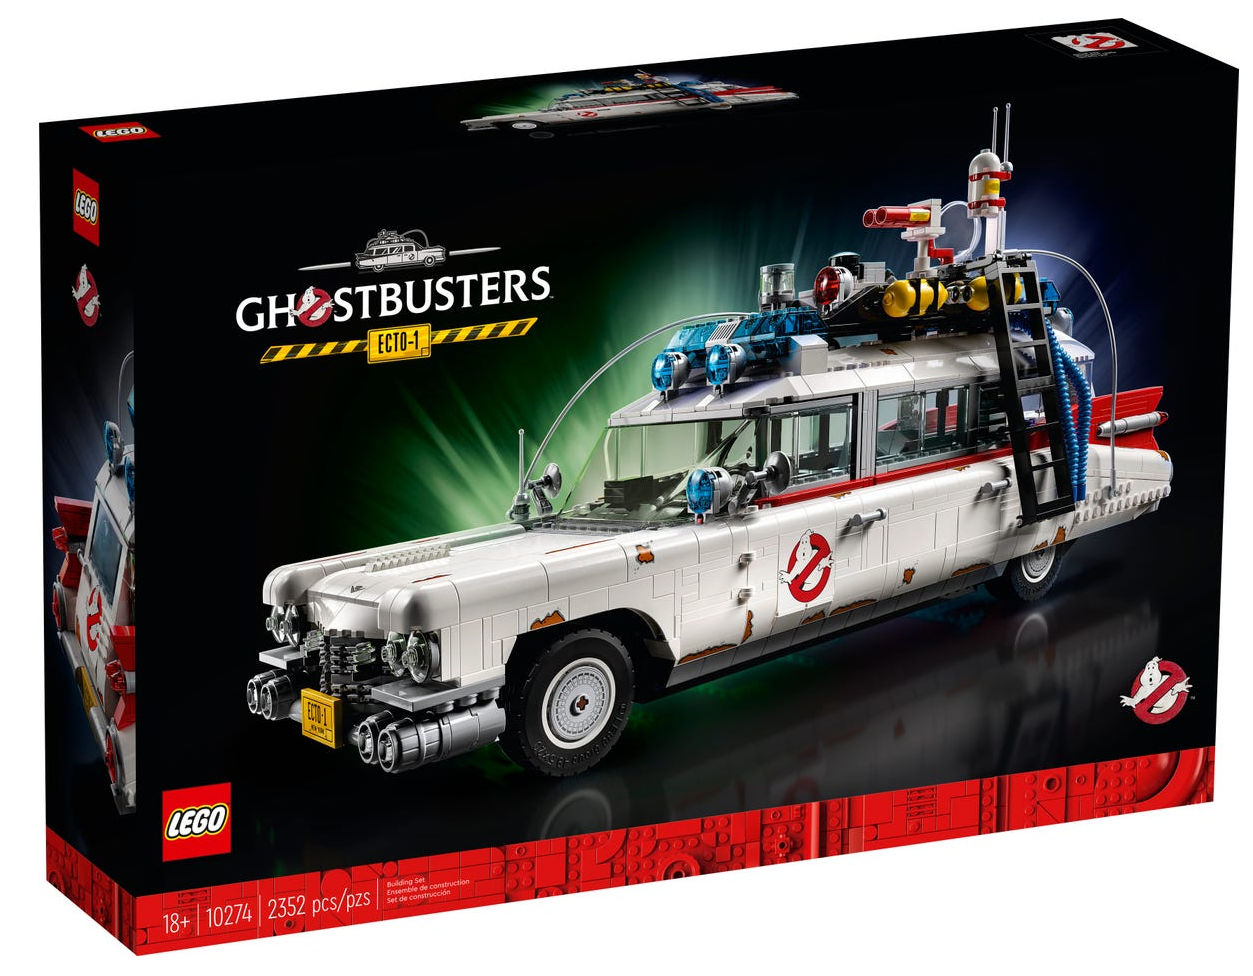 LEGO Ghostbusters 10274 Ecto-1 Officially Revealed | Geek Culture Ghostbusters Toy